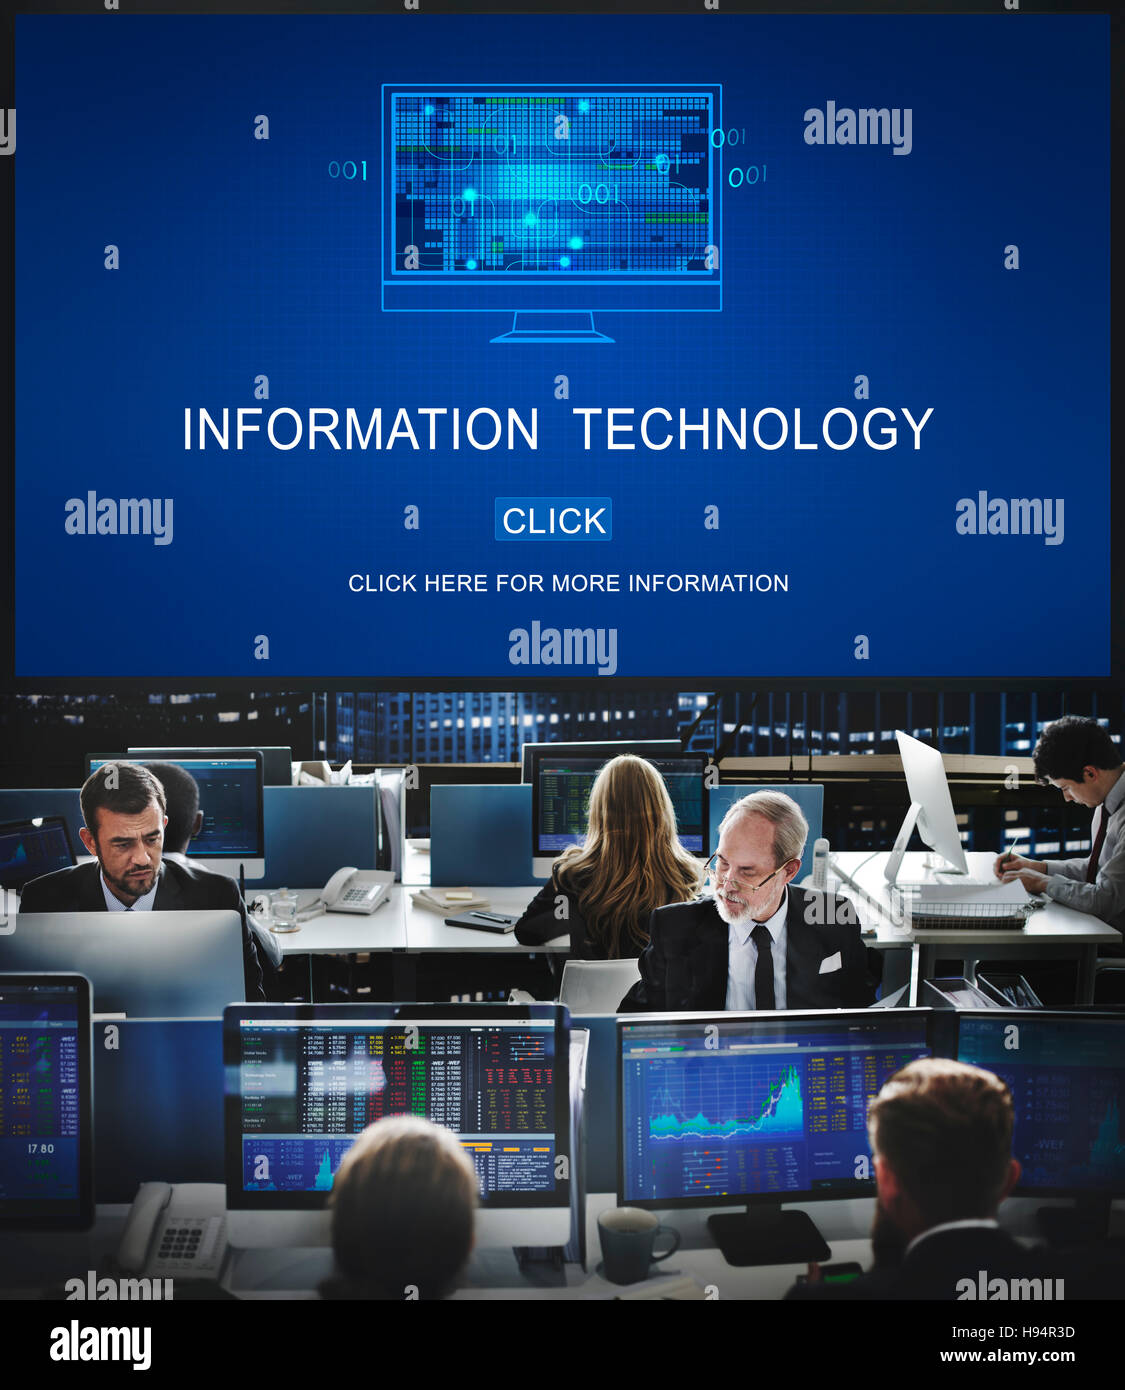 Information Technology Digital Data Electronic Concept Stock Photo